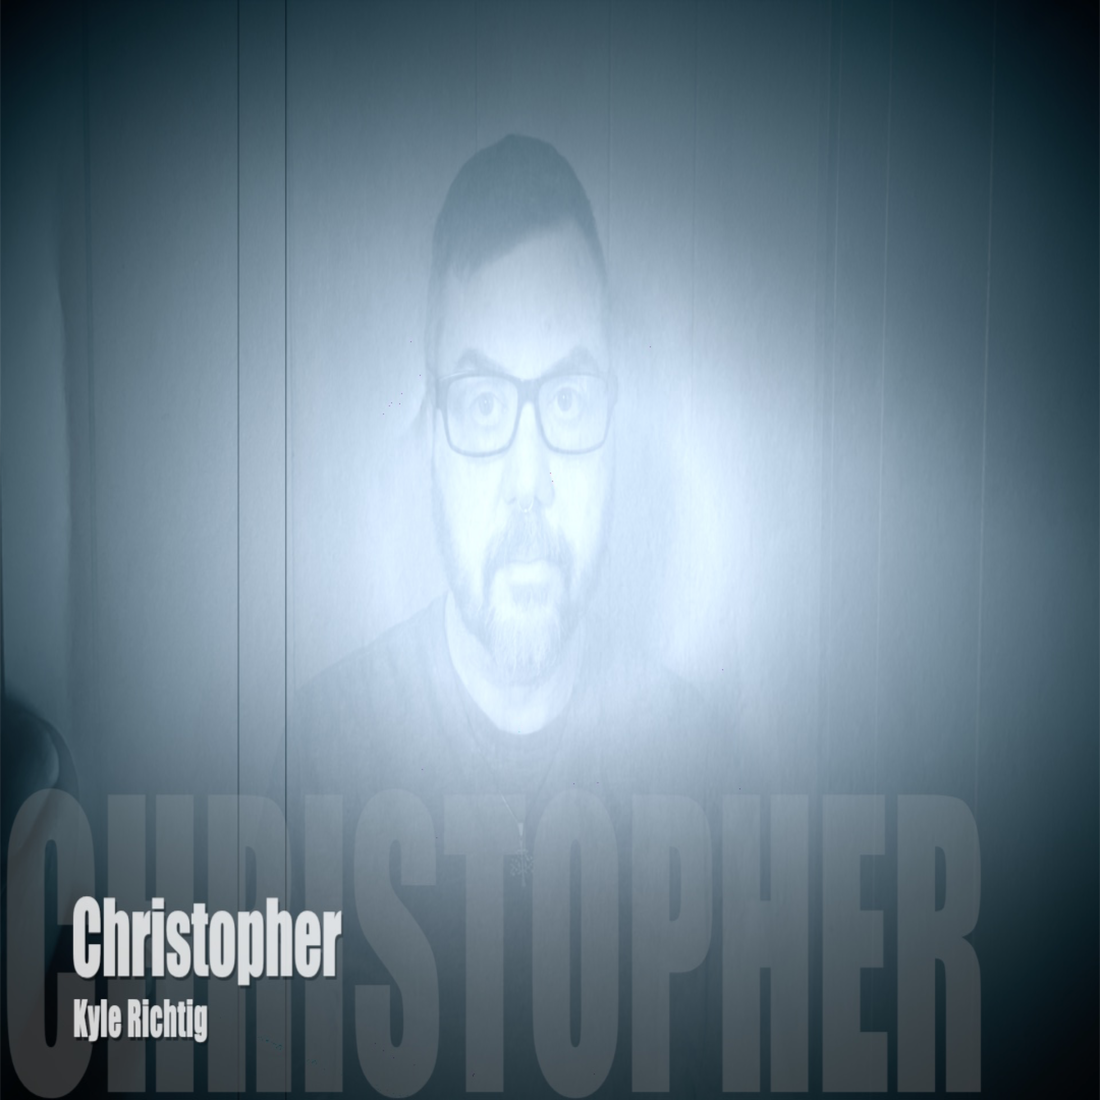 Music video for the song Christopher.